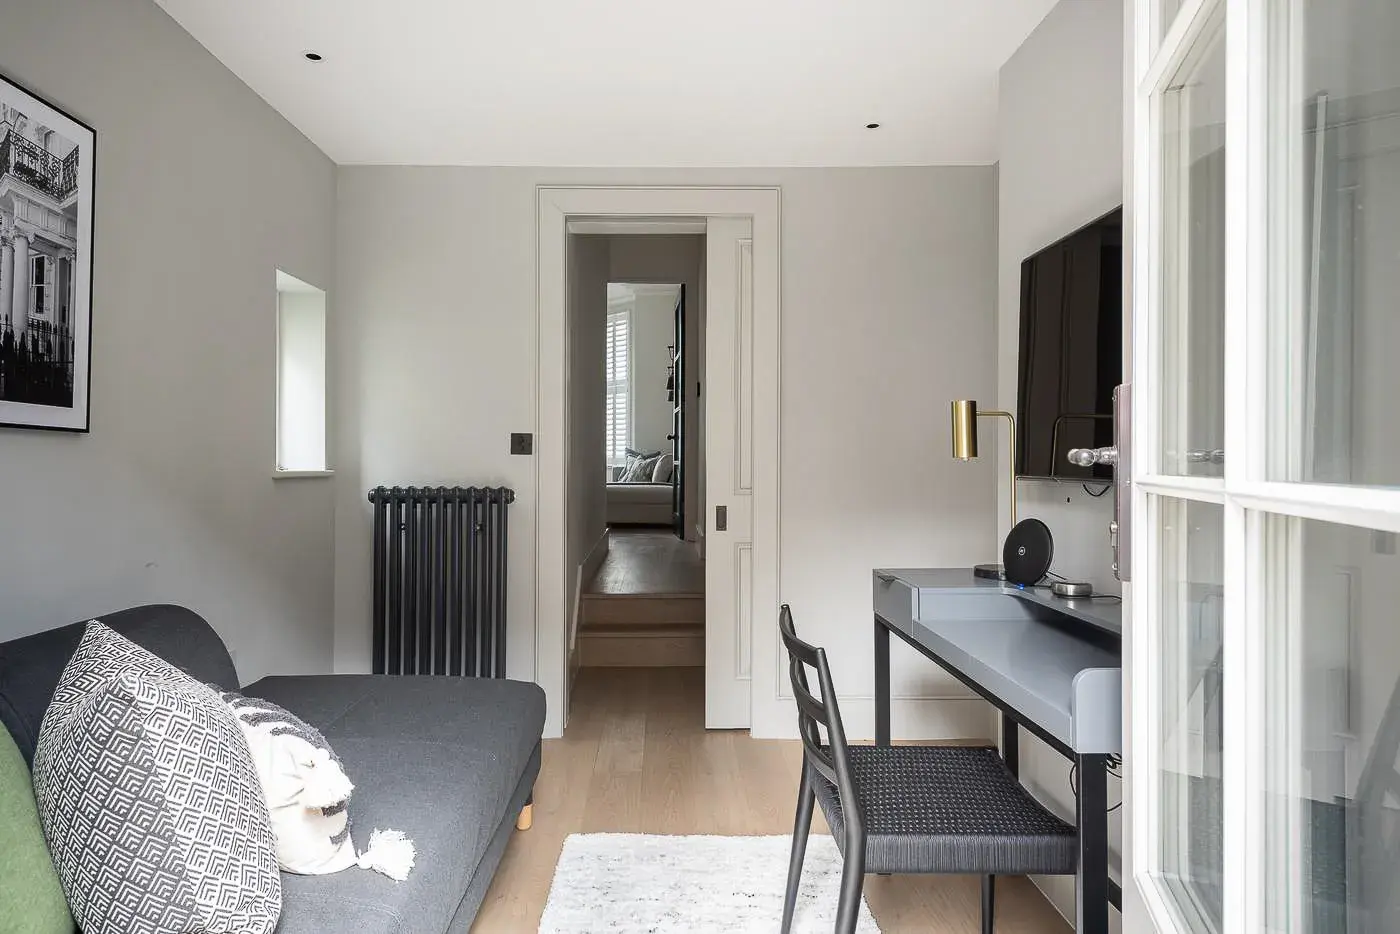 Radnor Walk, holiday home in Chelsea, London